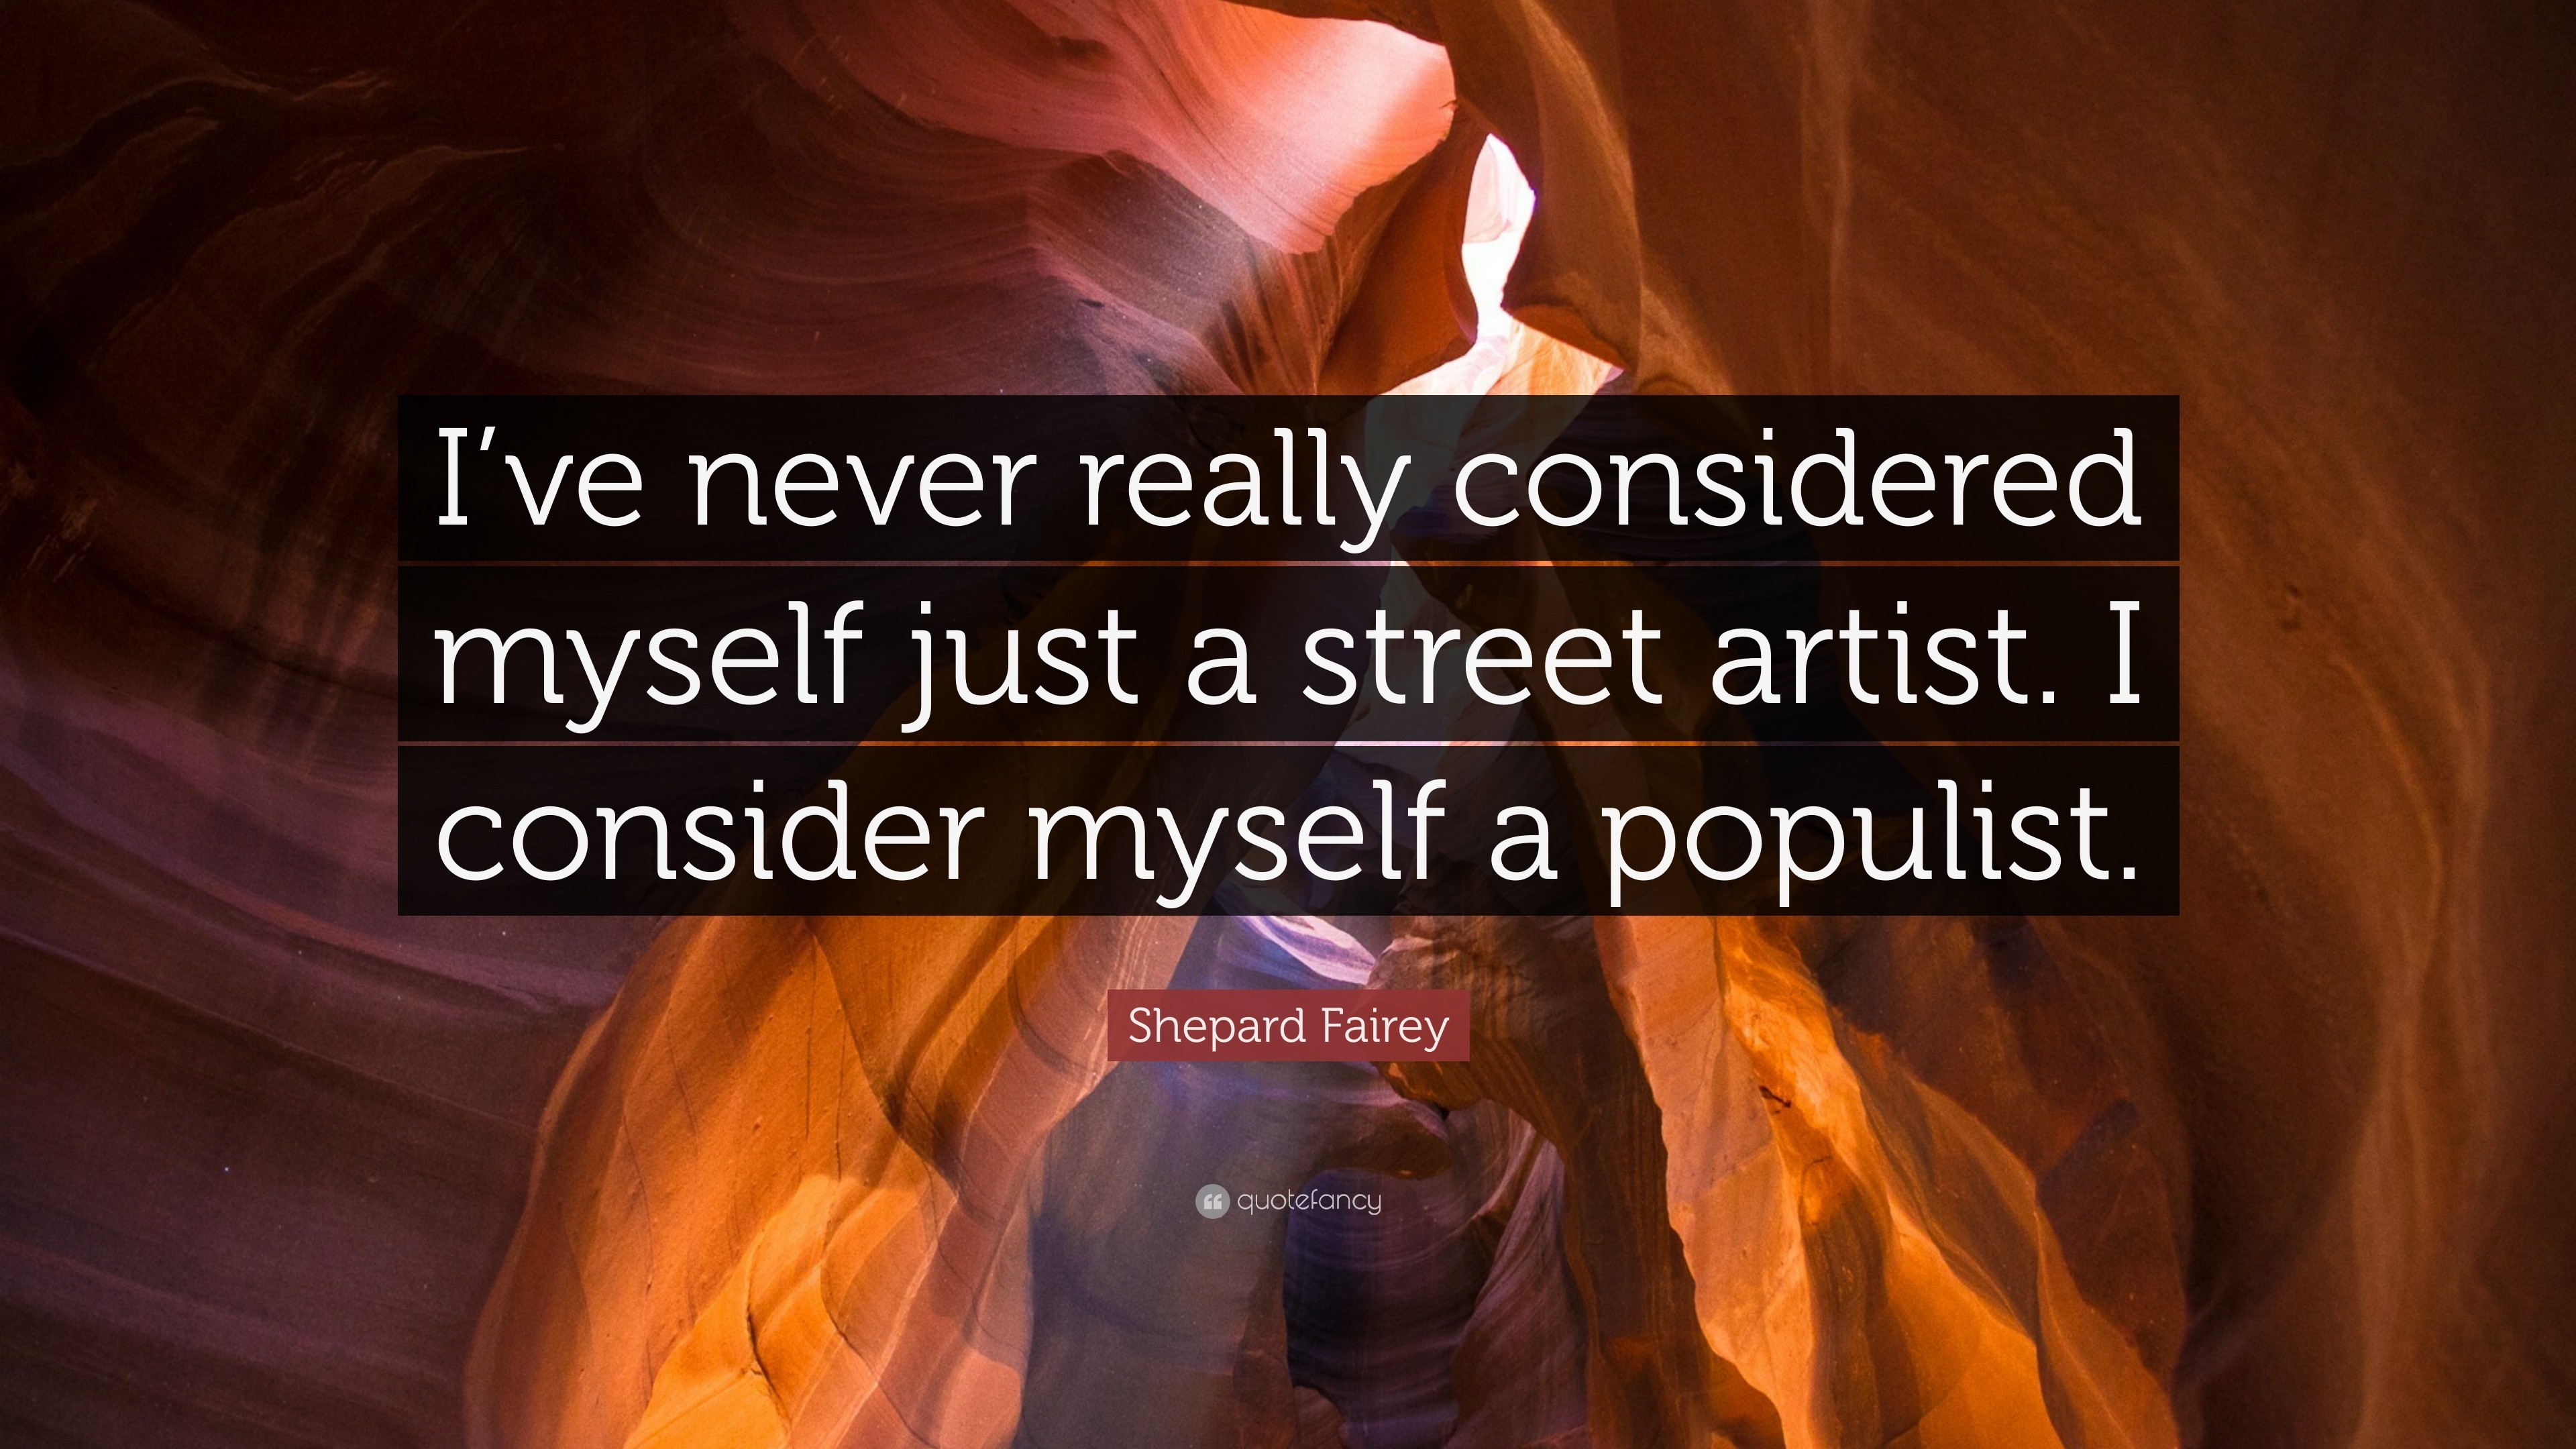 3840x2160 Shepard Fairey Quote: “I've never really considered myself just a street  artist